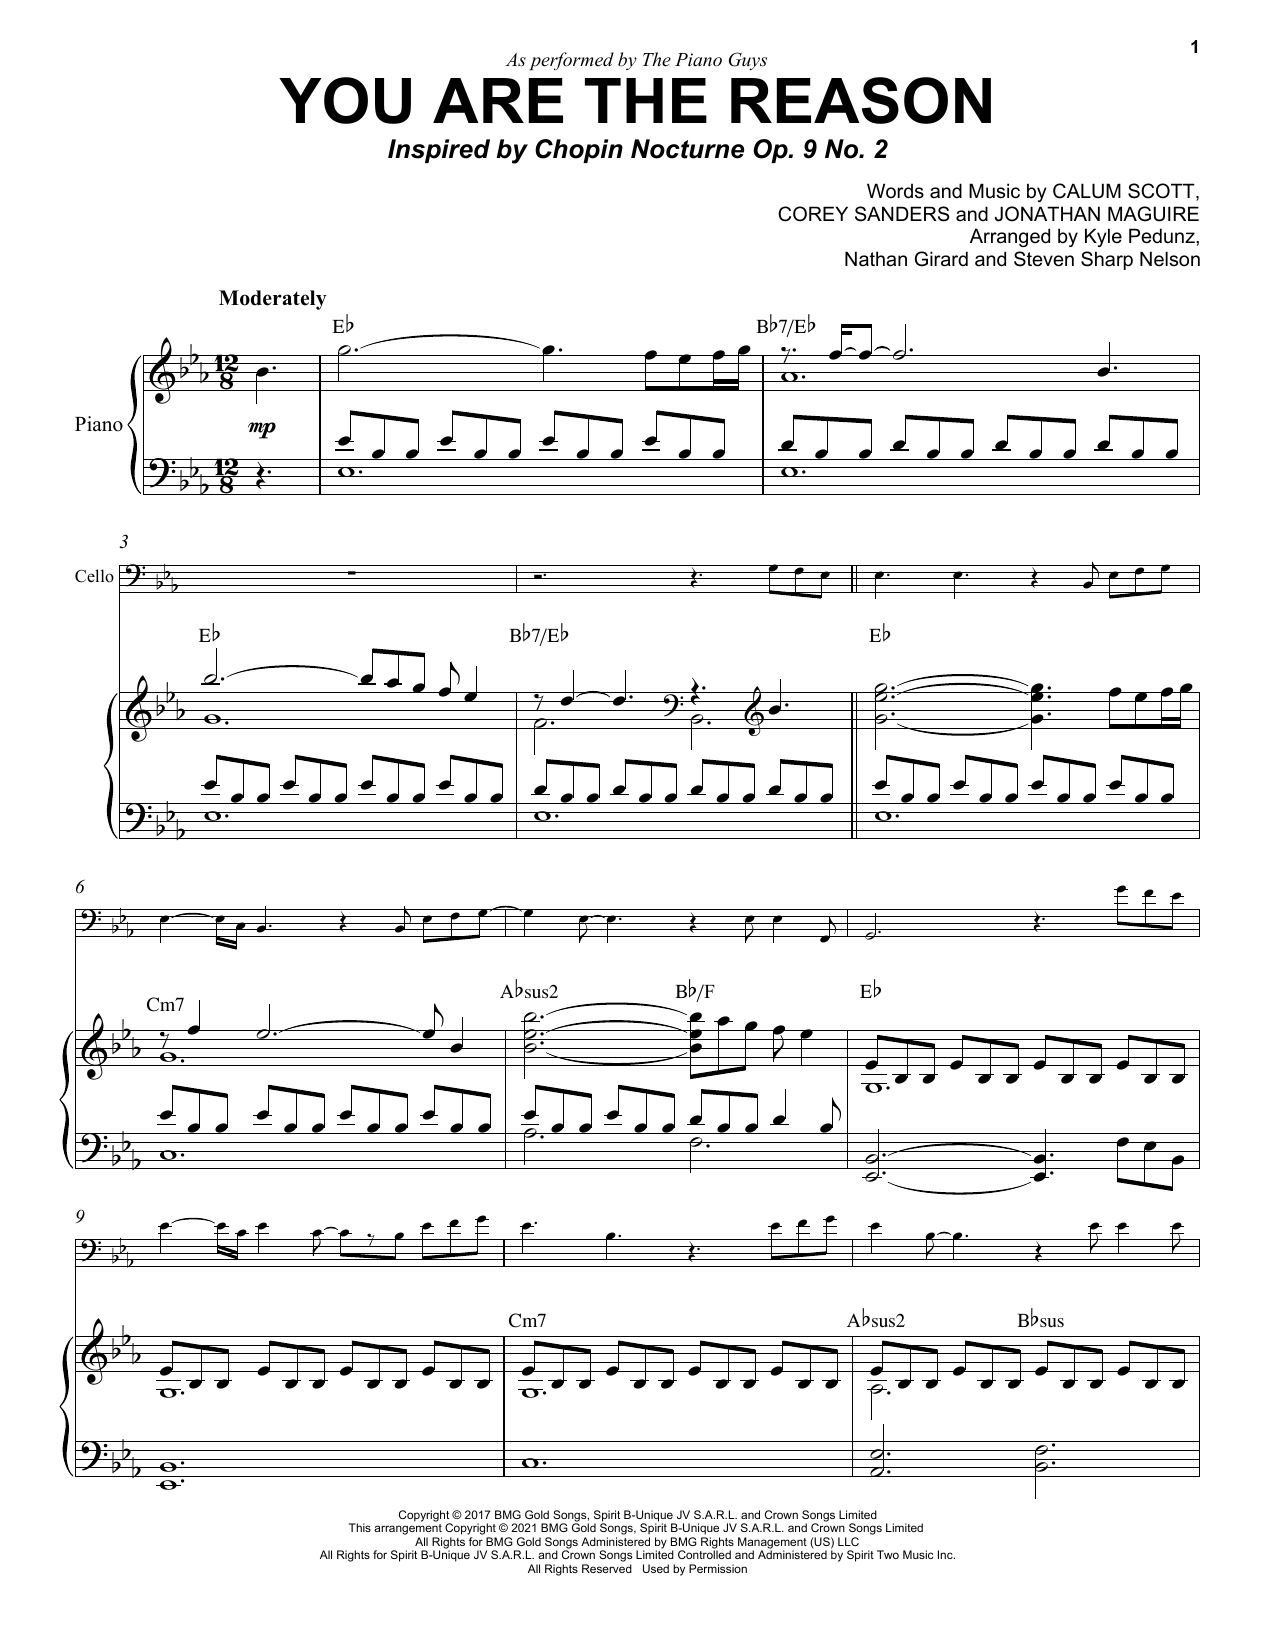 Download The Piano Guys You Are The Reason Sheet Music